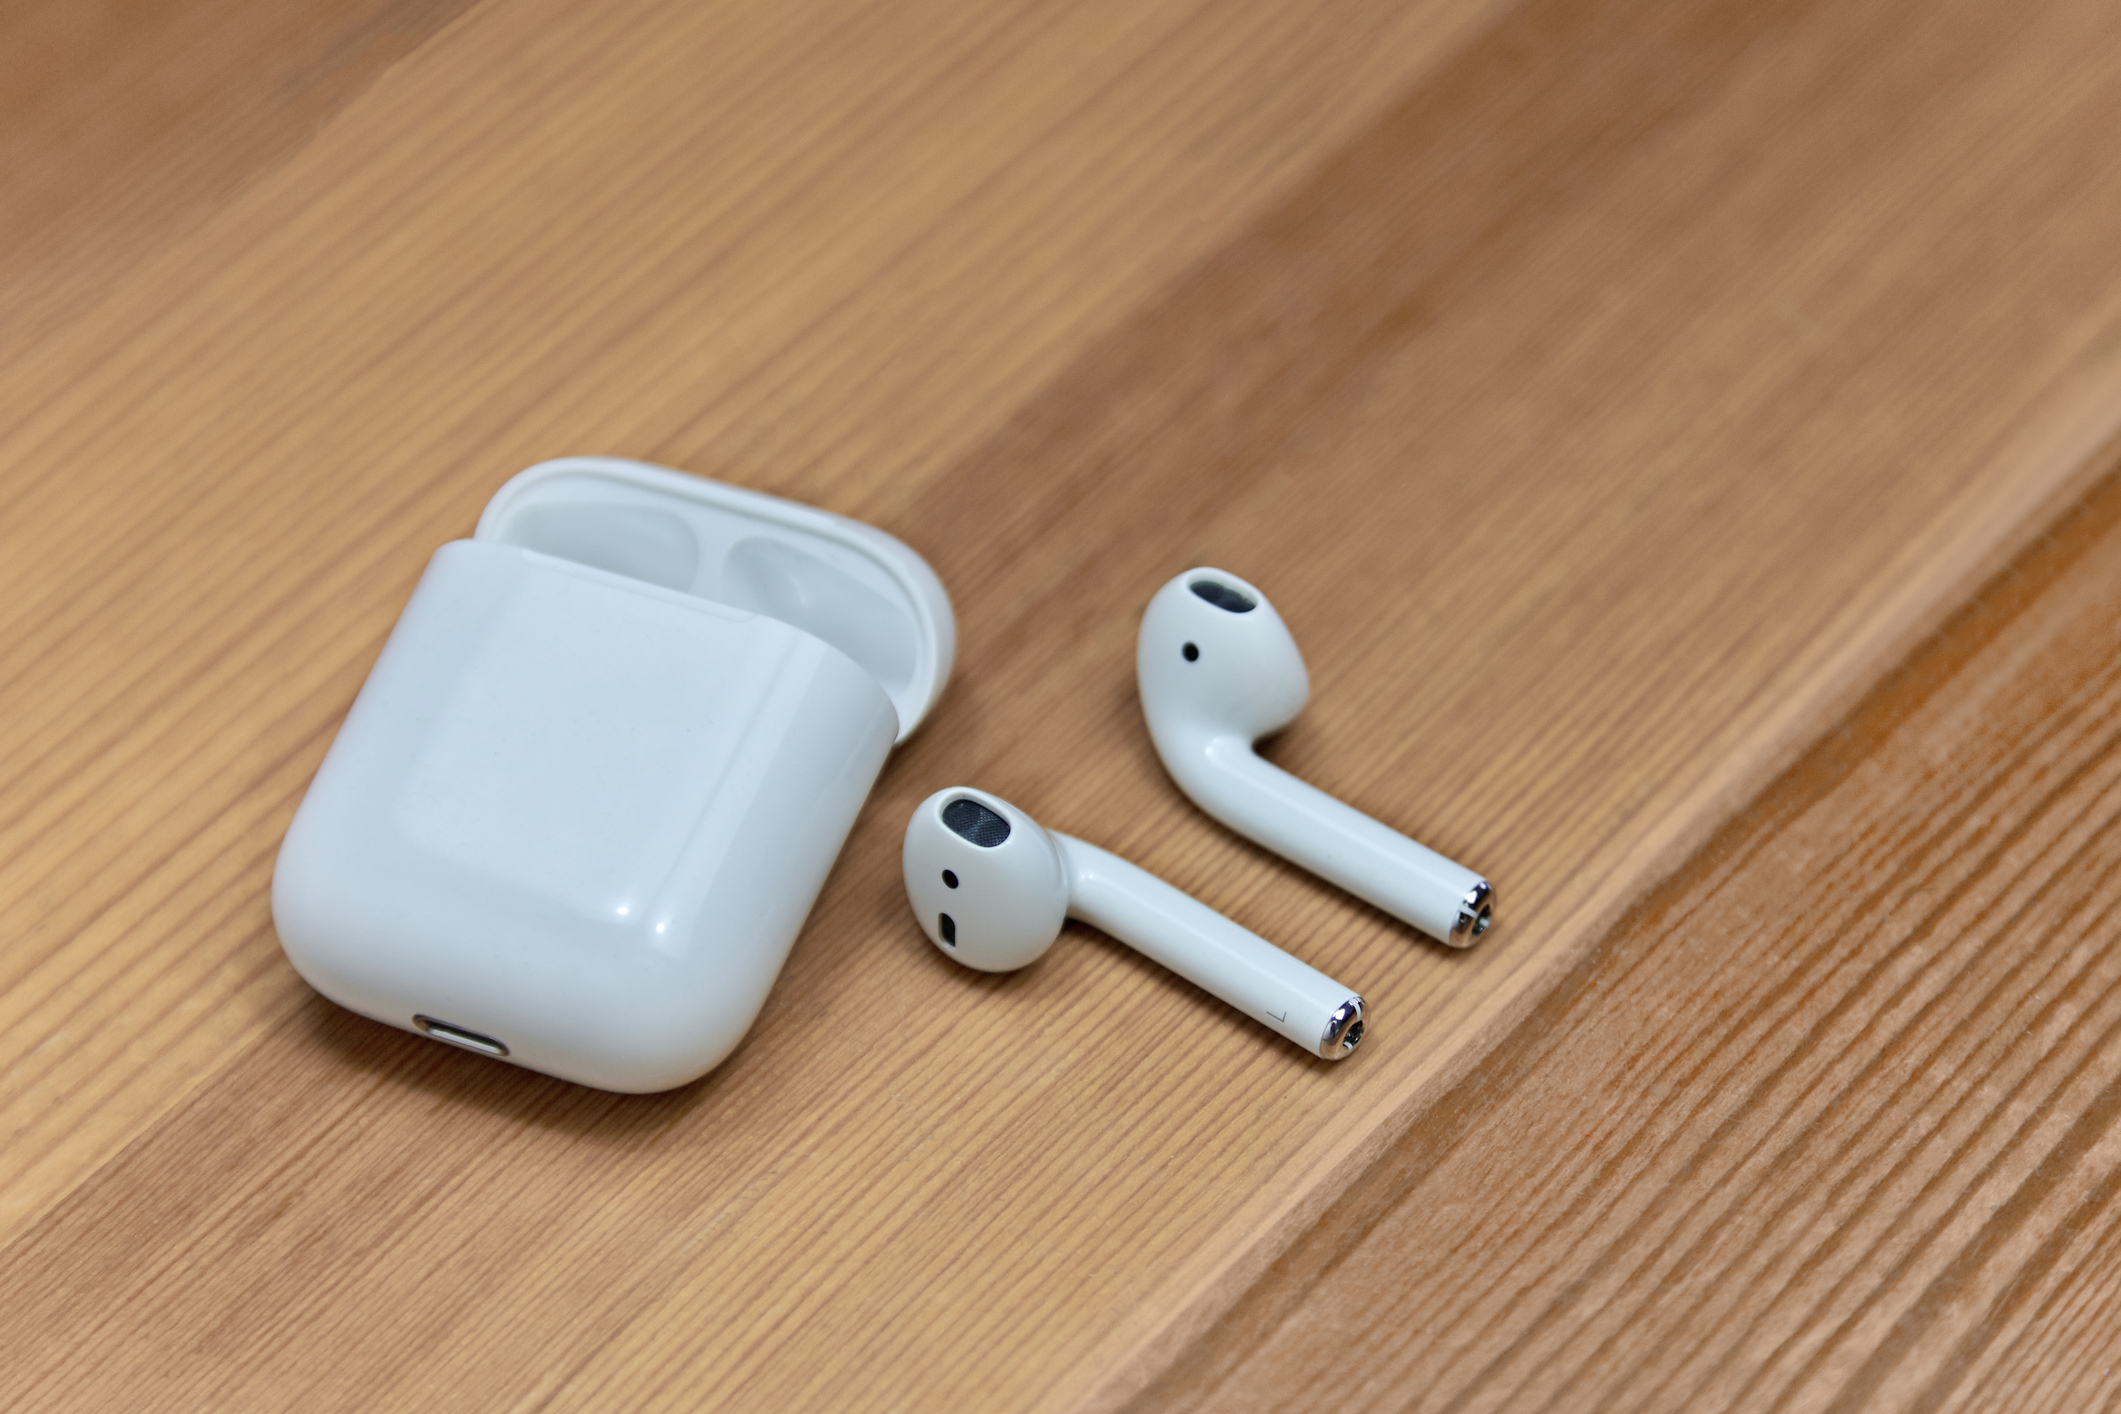 The third-gen Apple AirPods are down to $140 in 's Black